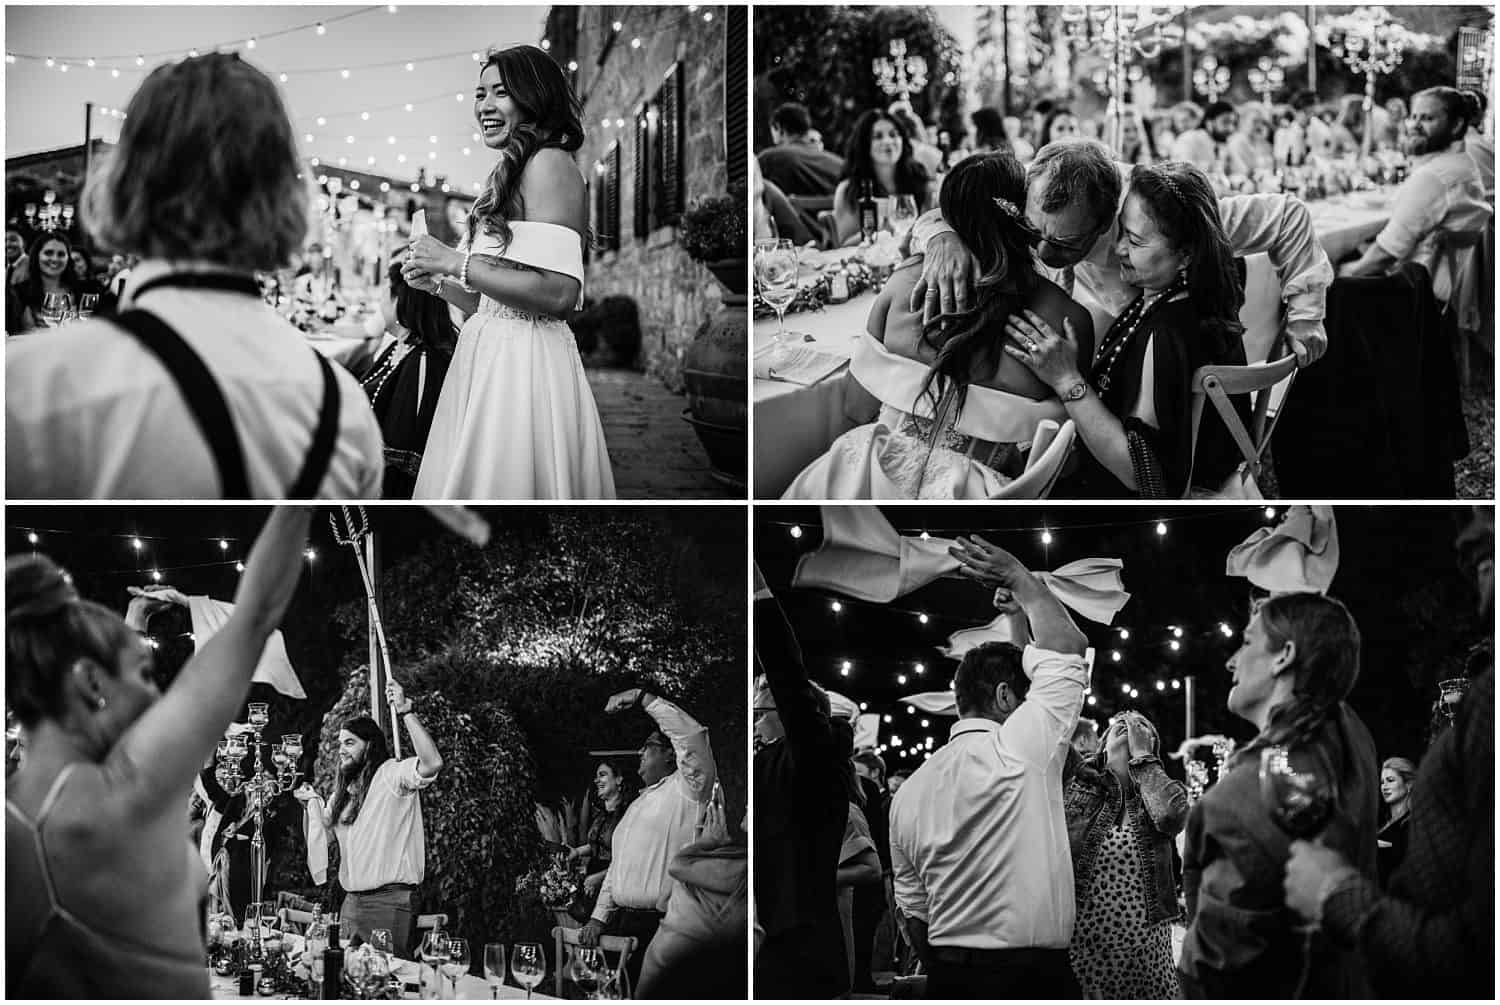 Wedding dinner and party at a destination wedding in Tuscany, photos by Ludovica & Valerio, wedding photographers